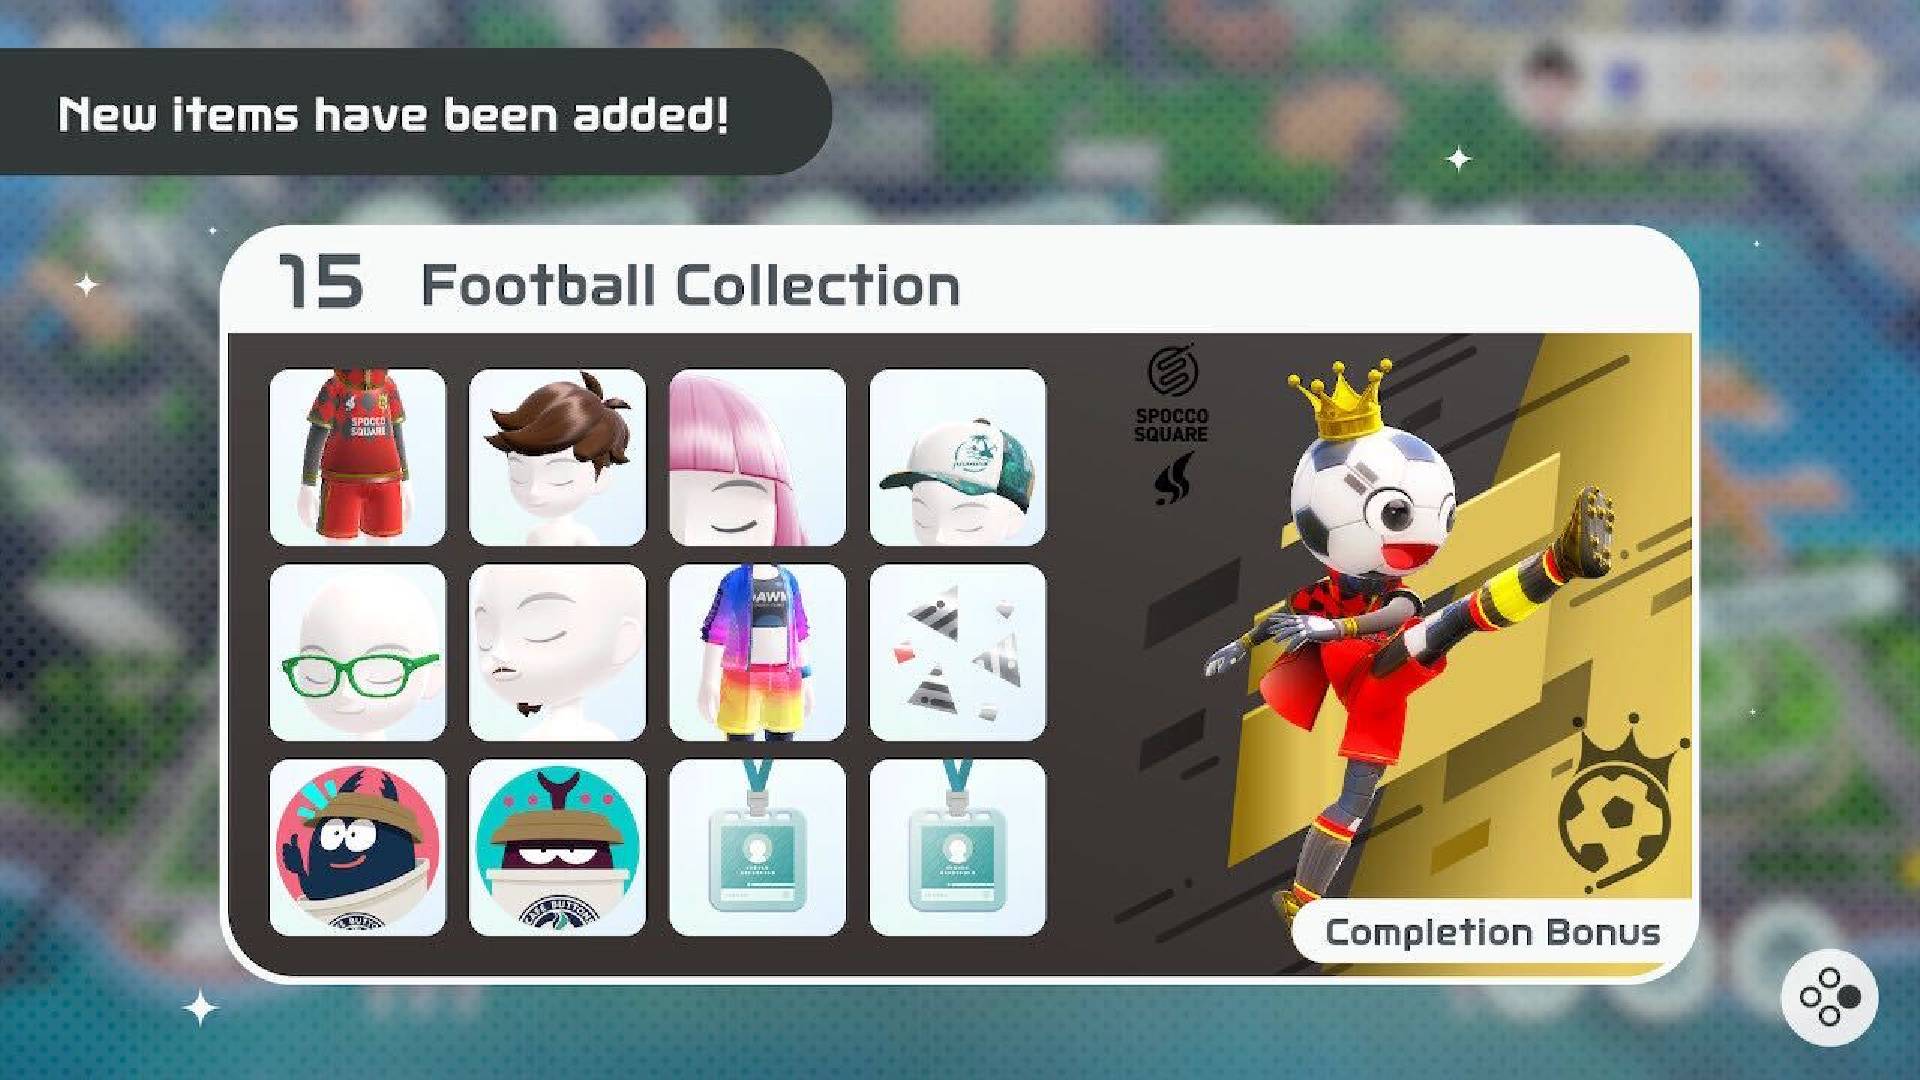 Nintendo Switch Sports cosmetics: a menu shows a variety of clothing options, based on the theme of football